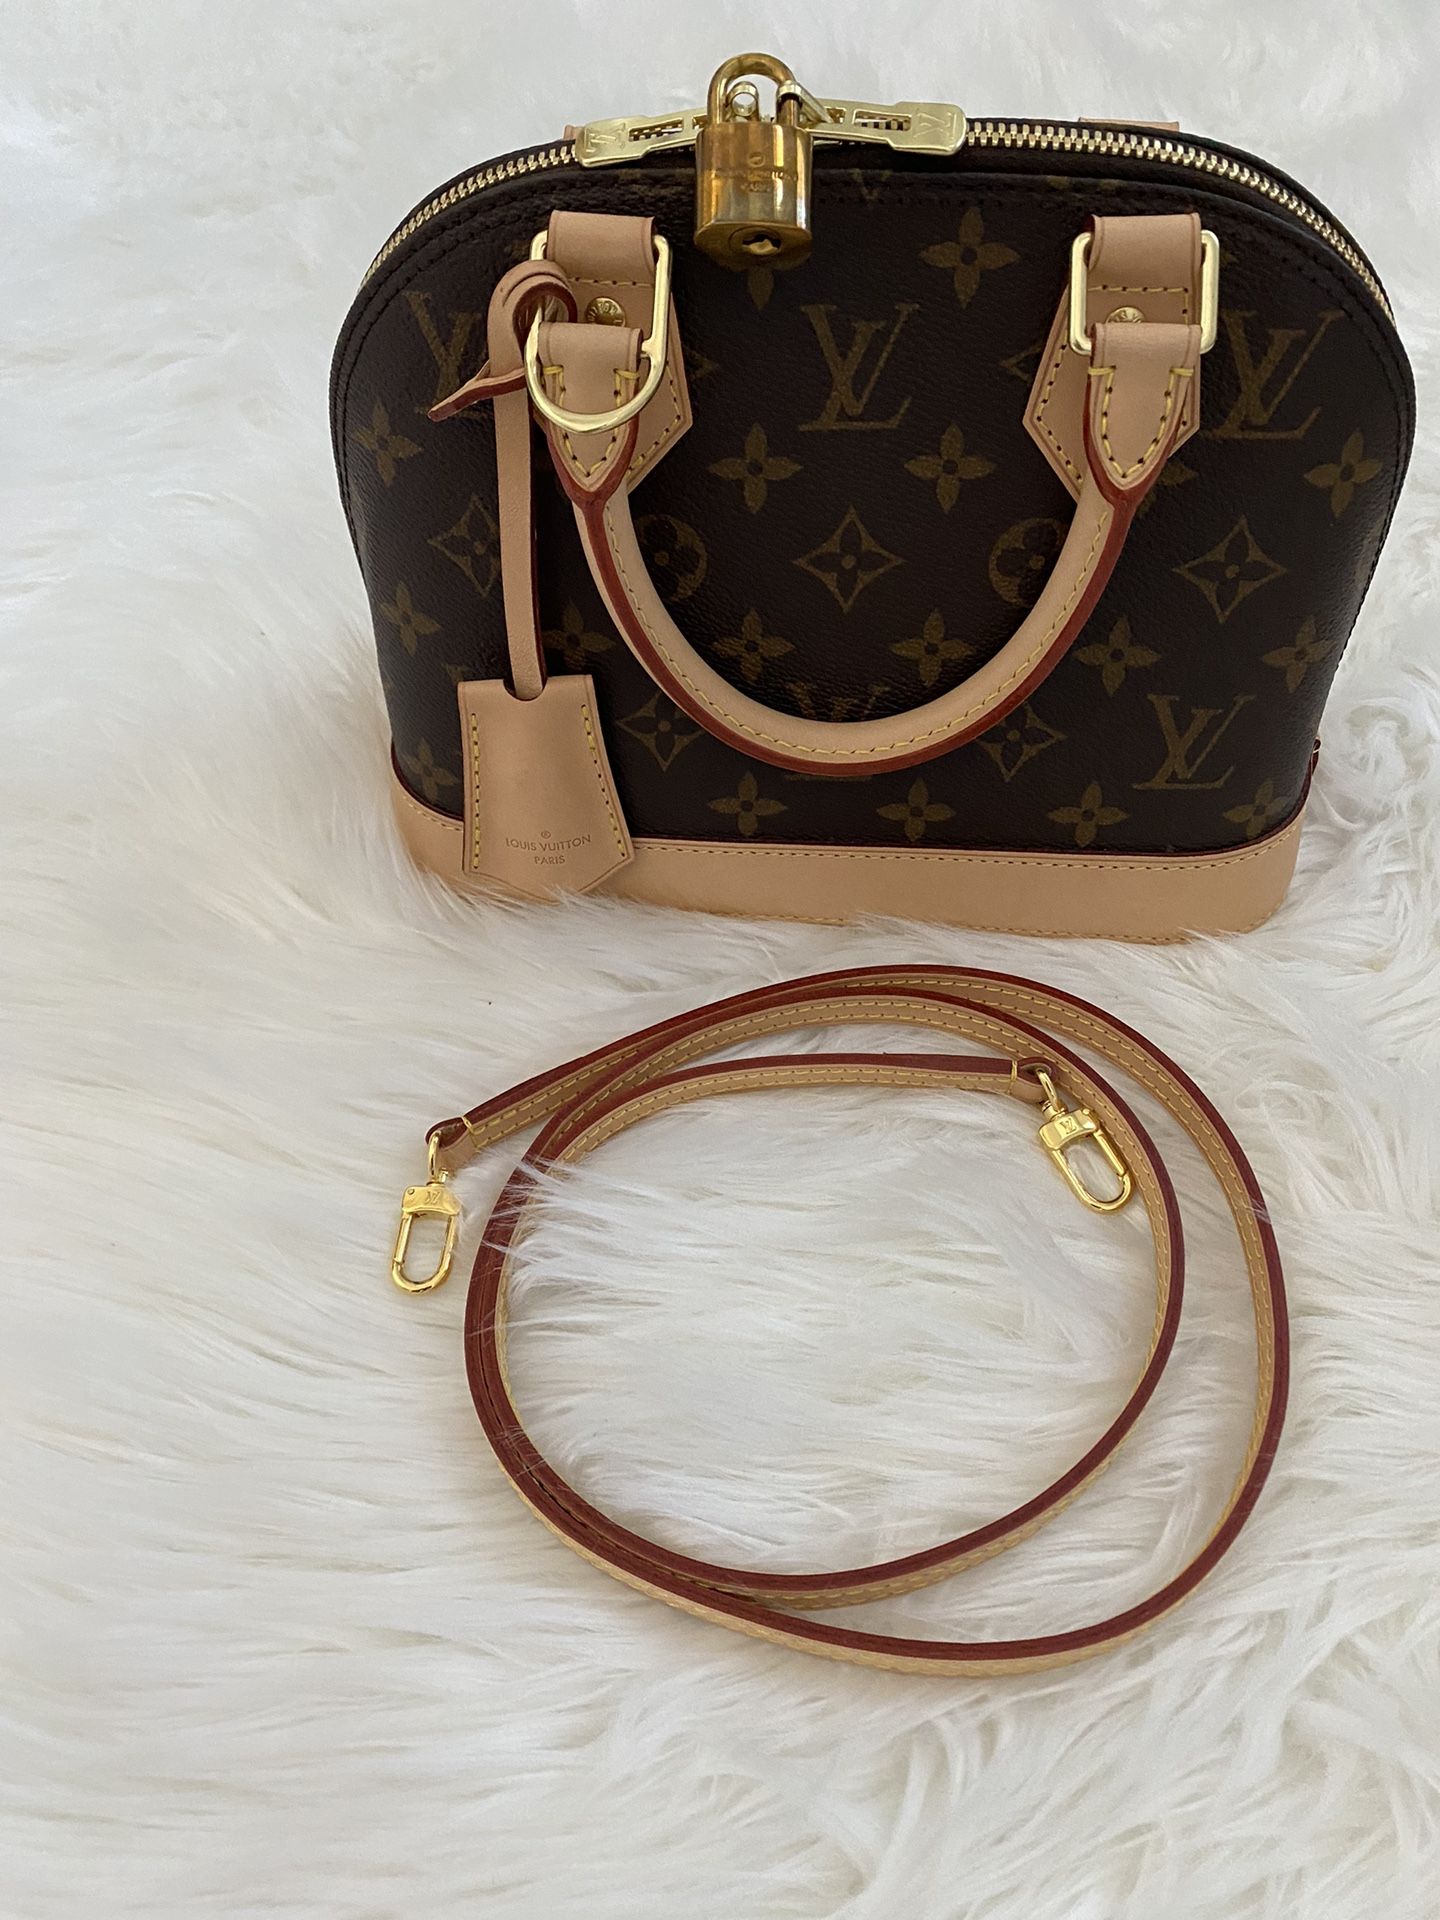 Authentic Louis Vuitton Monogram Alma BB for Sale in Brentwood